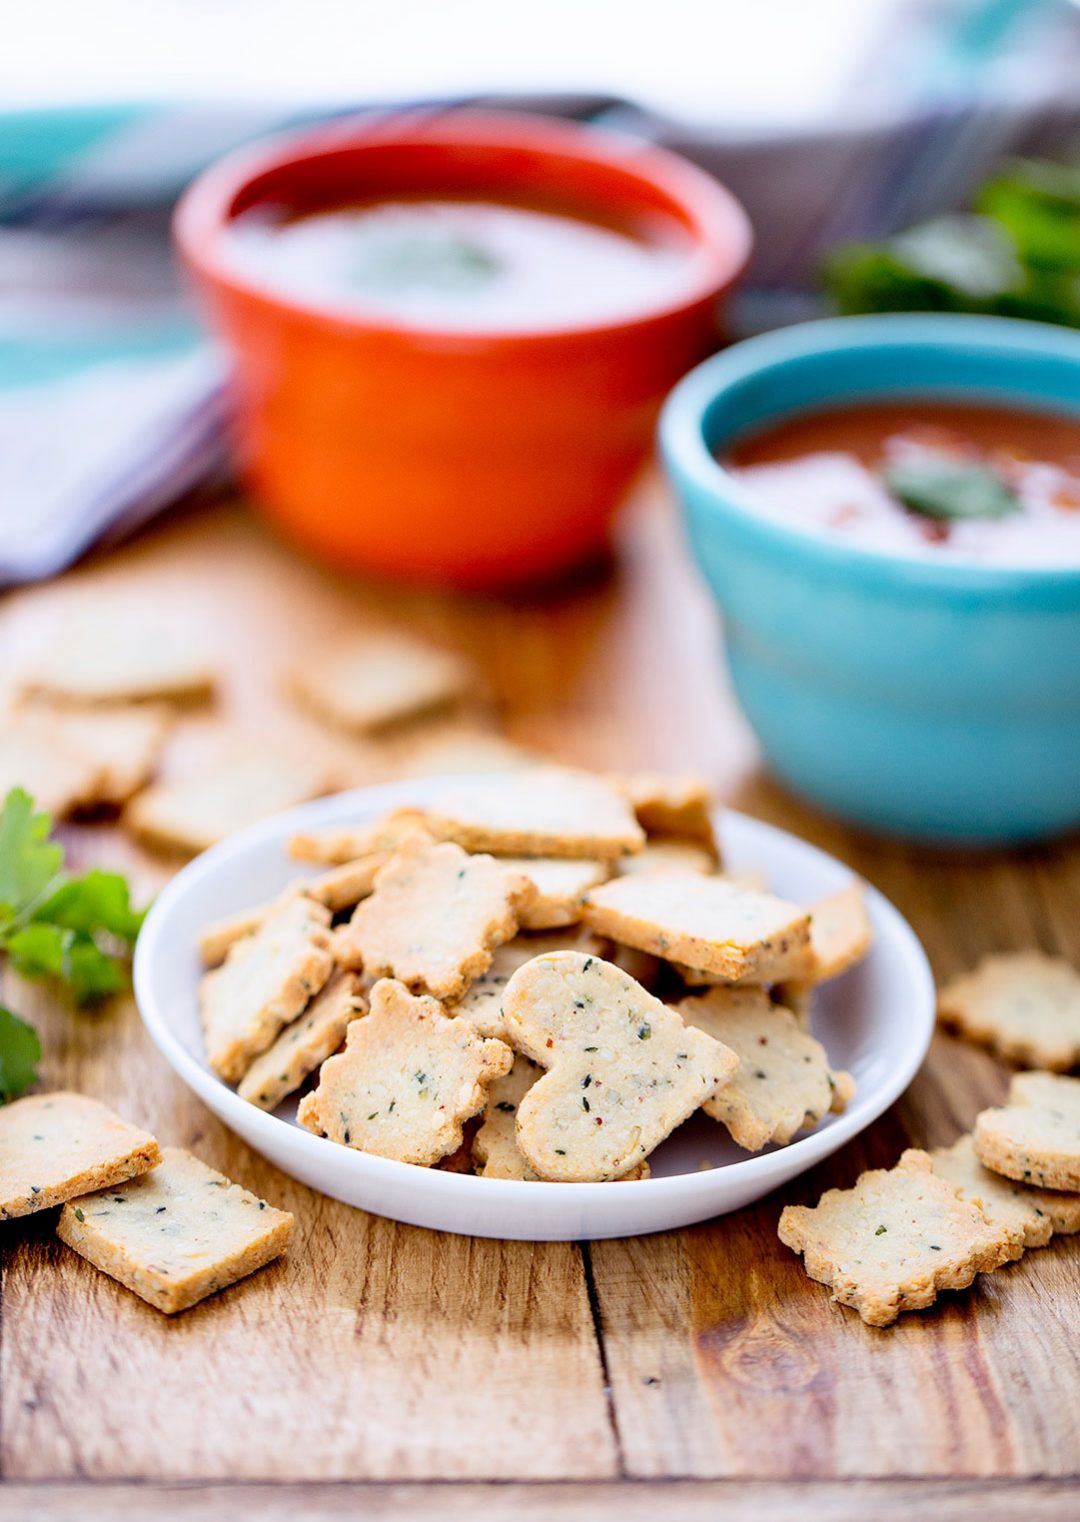 Homemade Hemp Heart Crackers | Homemade hemp heart crackers are so much more than a soup topping! Pack them in lunch boxes for a crunchy snack. Grind the crackers to mix into meatballs or top casseroles. Spread them with nut butter or jam for a filling snack. Don't forget to include on your cheese trays! | WildernessFamilyNaturals.com